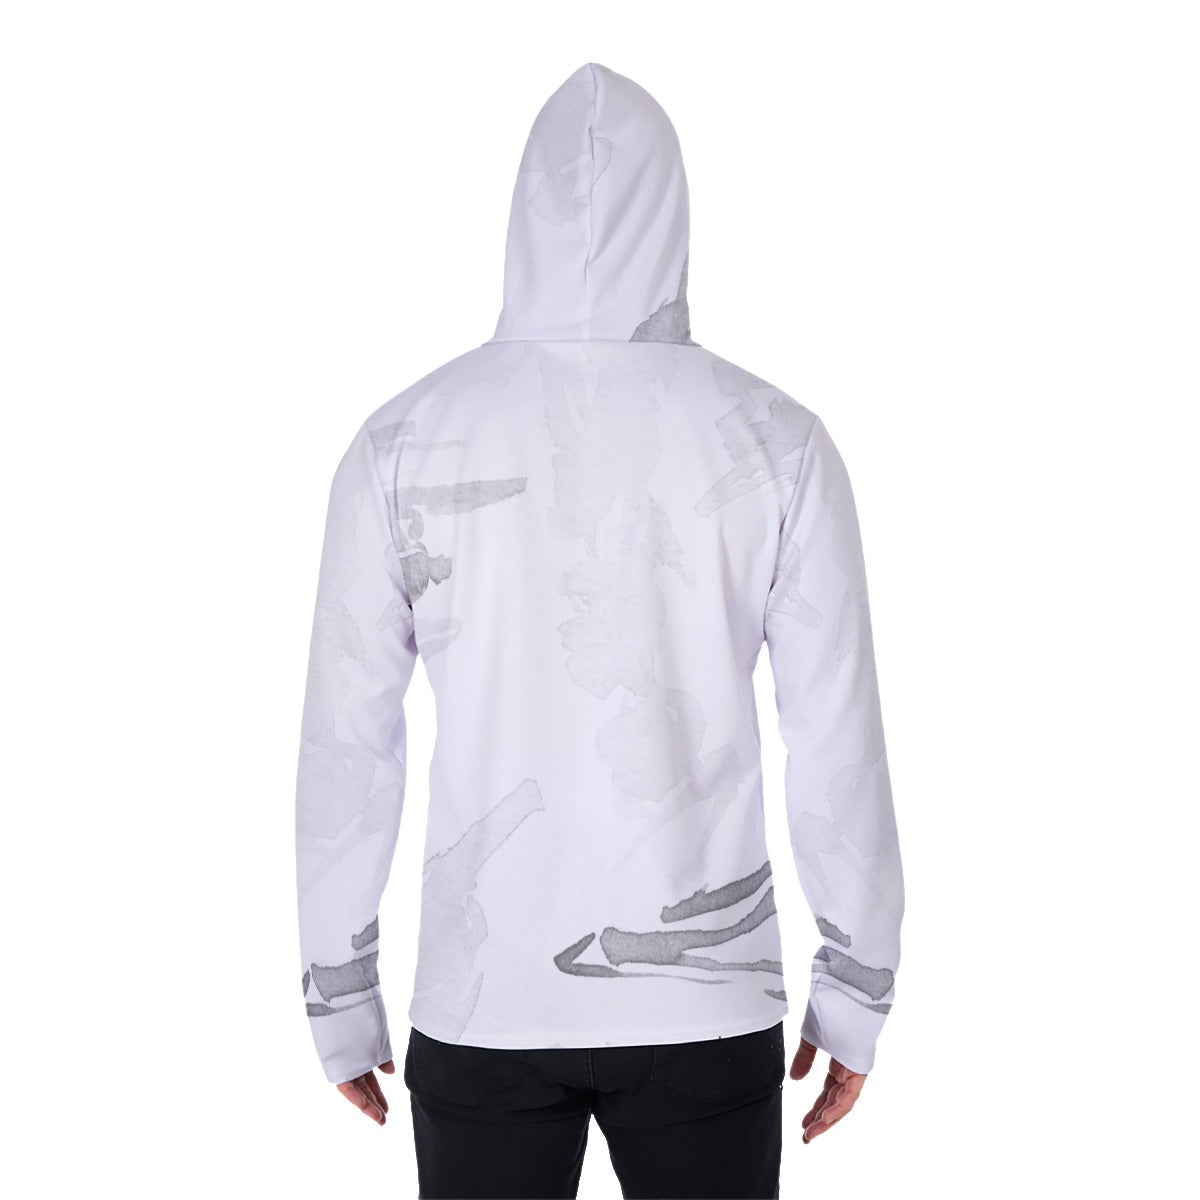 Men's All Over Print Hoodie With Mask